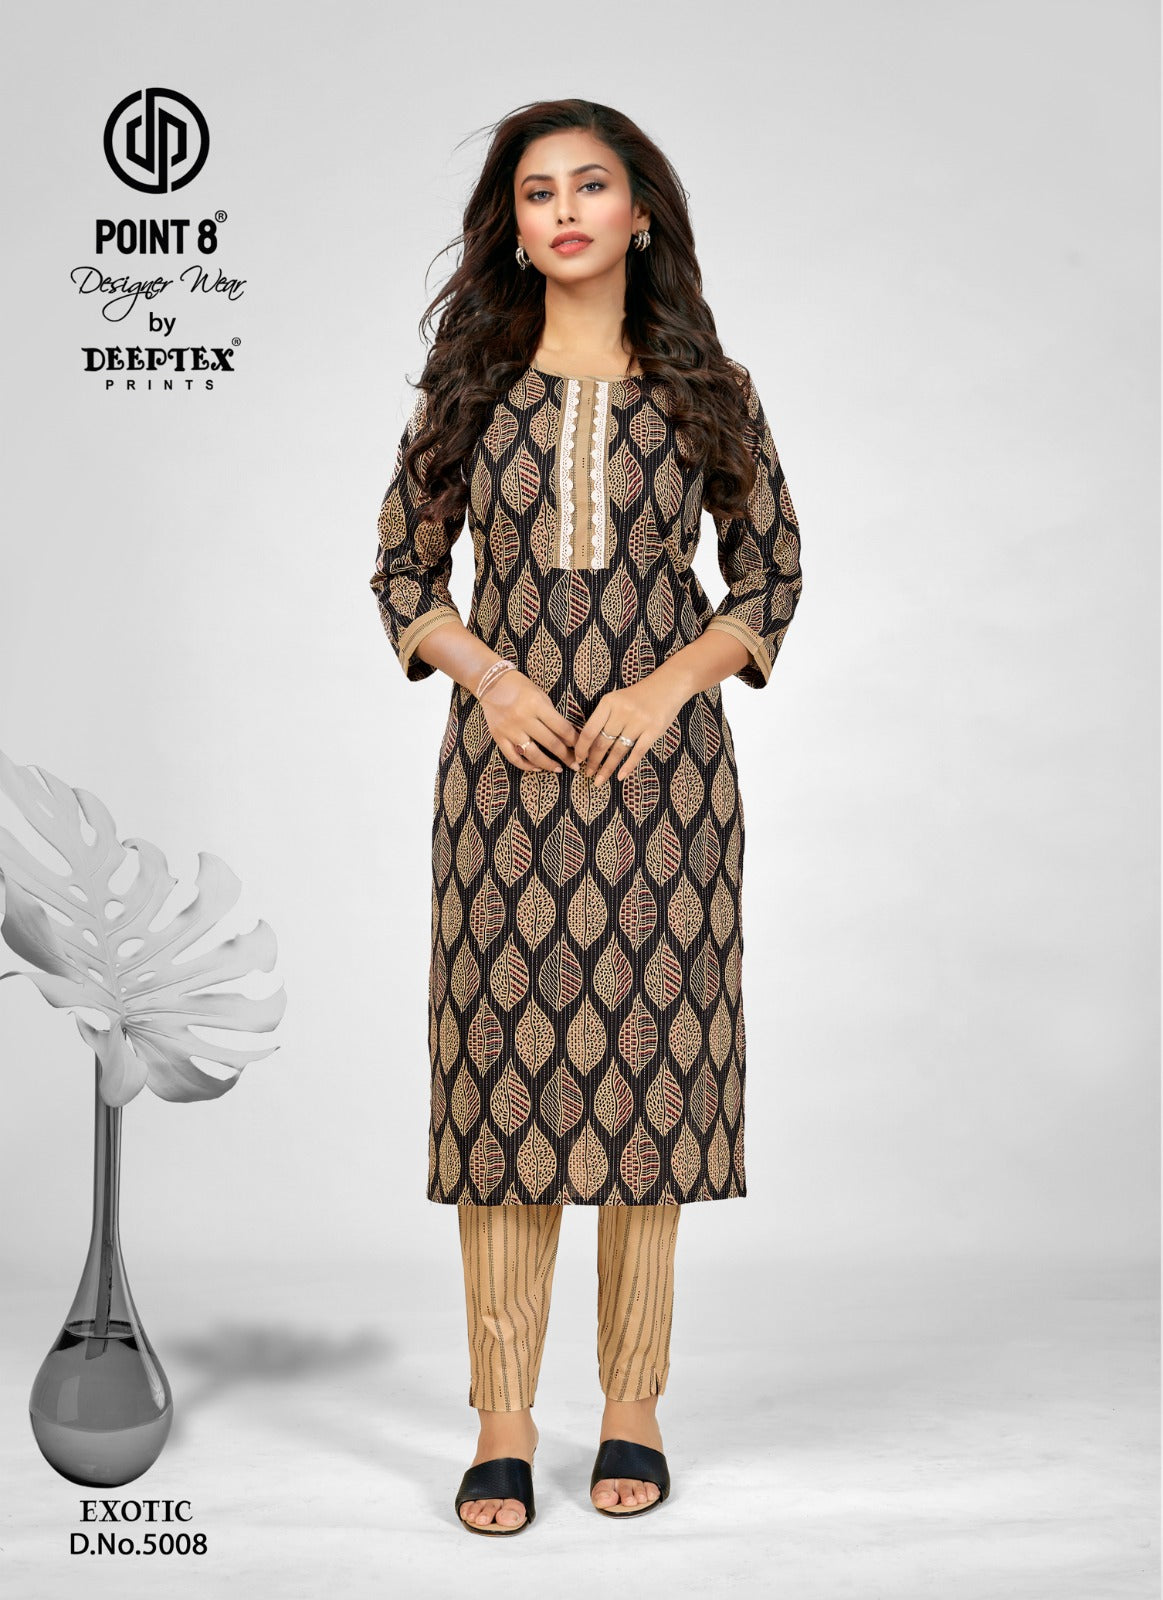 Deeptex Prints Exotic Vol 6 Cotton Printed Readymade Kurti With Pant Collection At Wholesale Rate - jilaniwholesalesuit